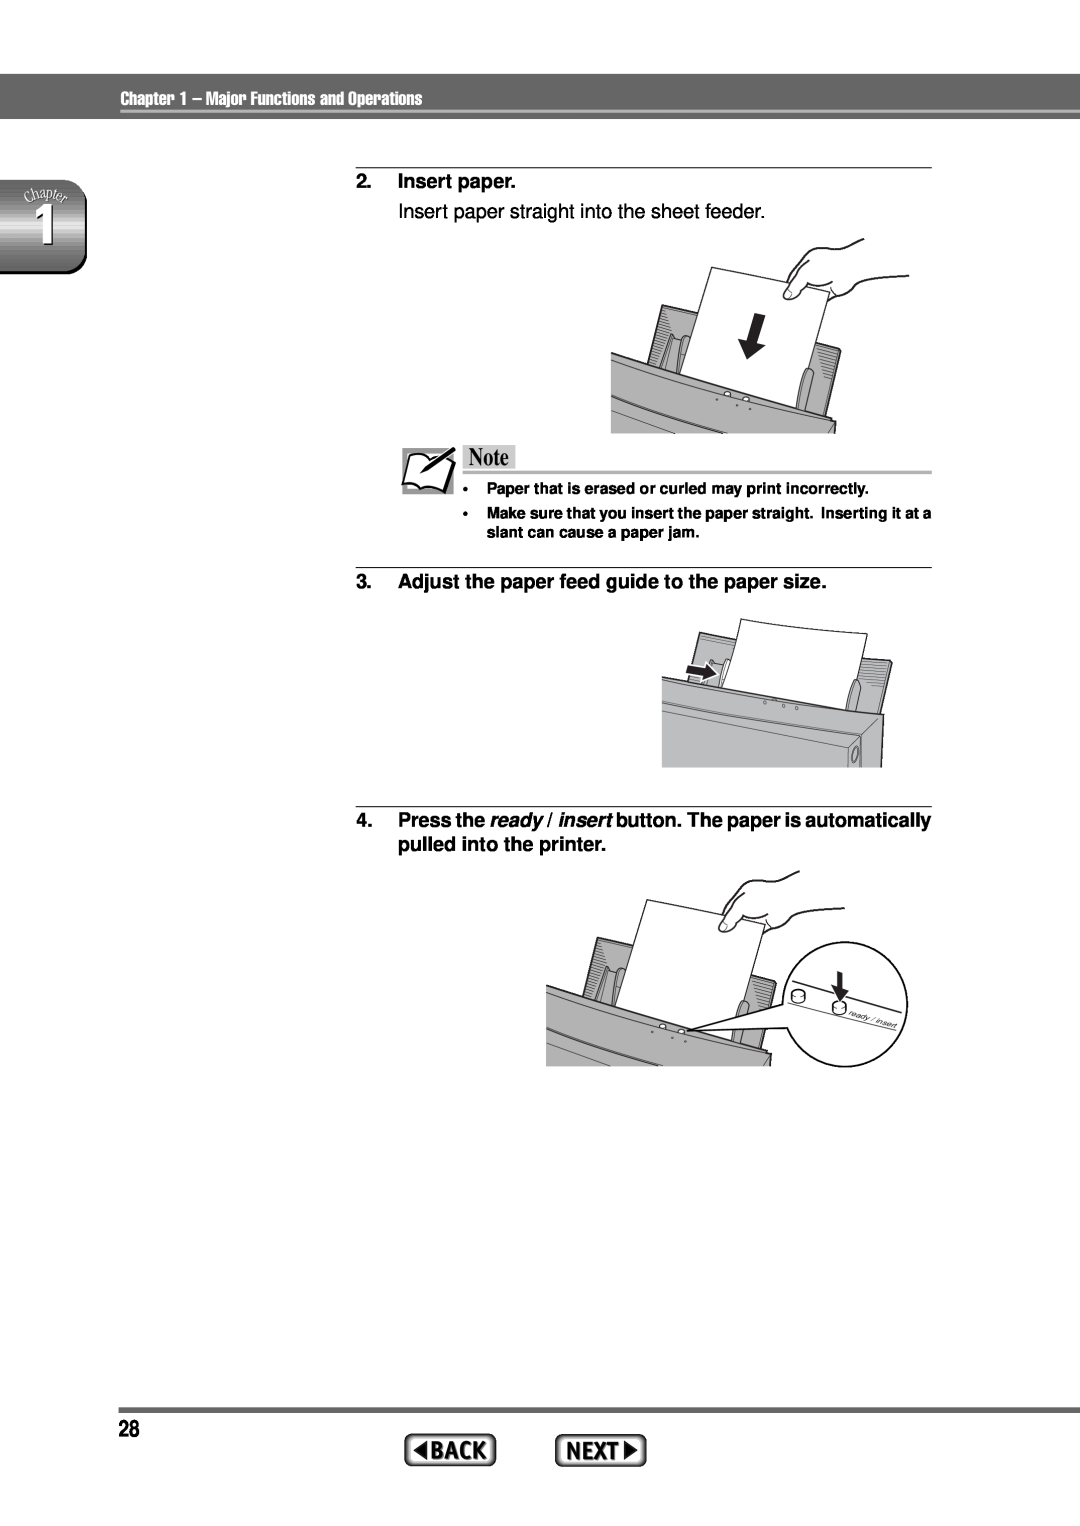 Alps Electric MD-1300 manual Insert paper straight into the sheet feeder, Adjust the paper feed guide to the paper size 